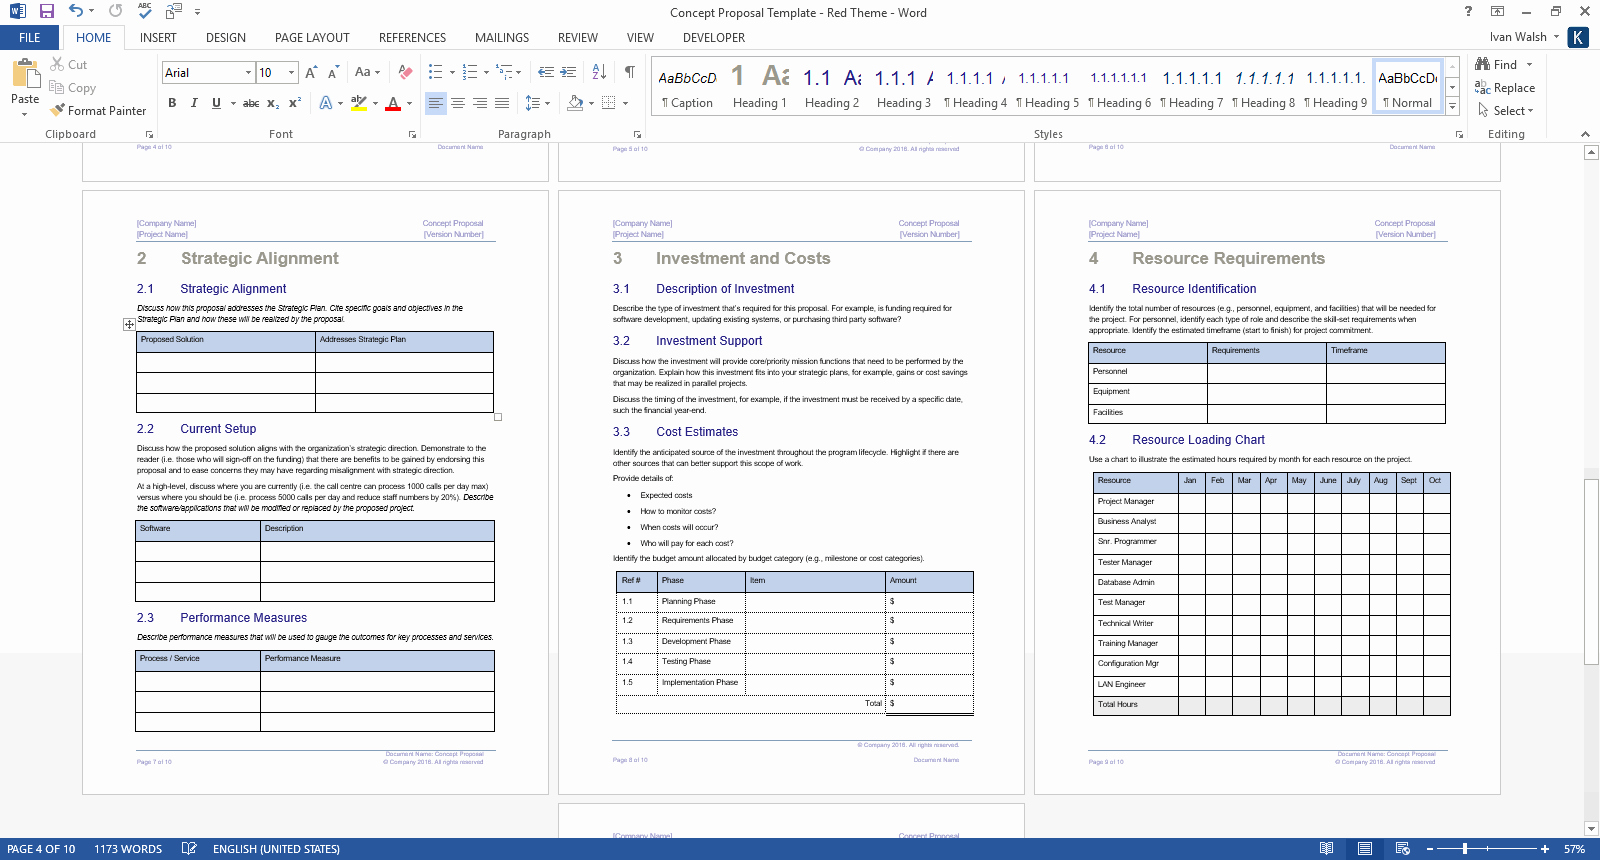 Microsoft Office Proposal Template Best Of Concept Proposal Template Ms Word Excel Spreadsheets